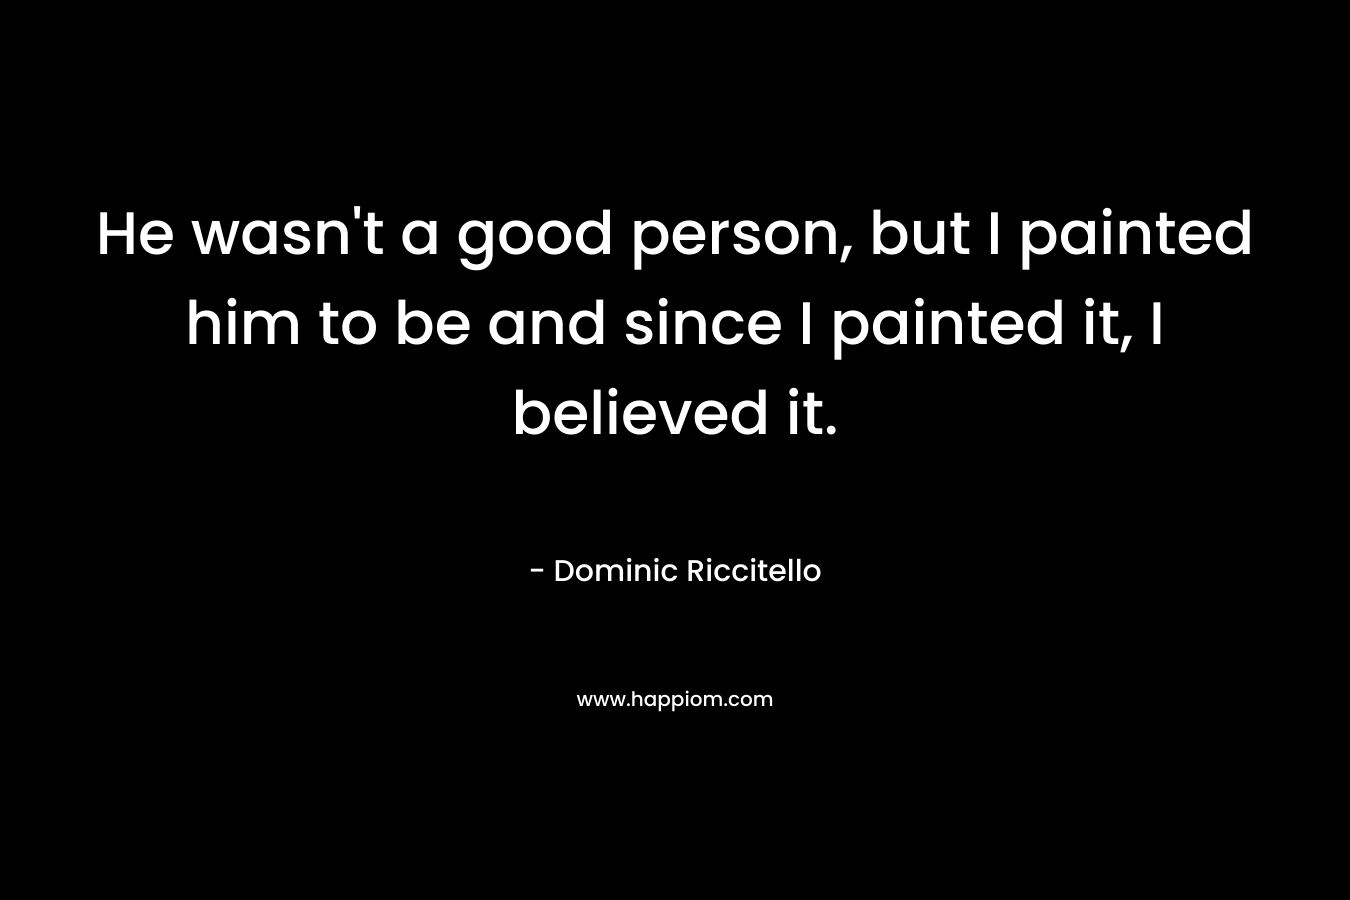 He wasn’t a good person, but I painted him to be and since I painted it, I believed it. – Dominic Riccitello